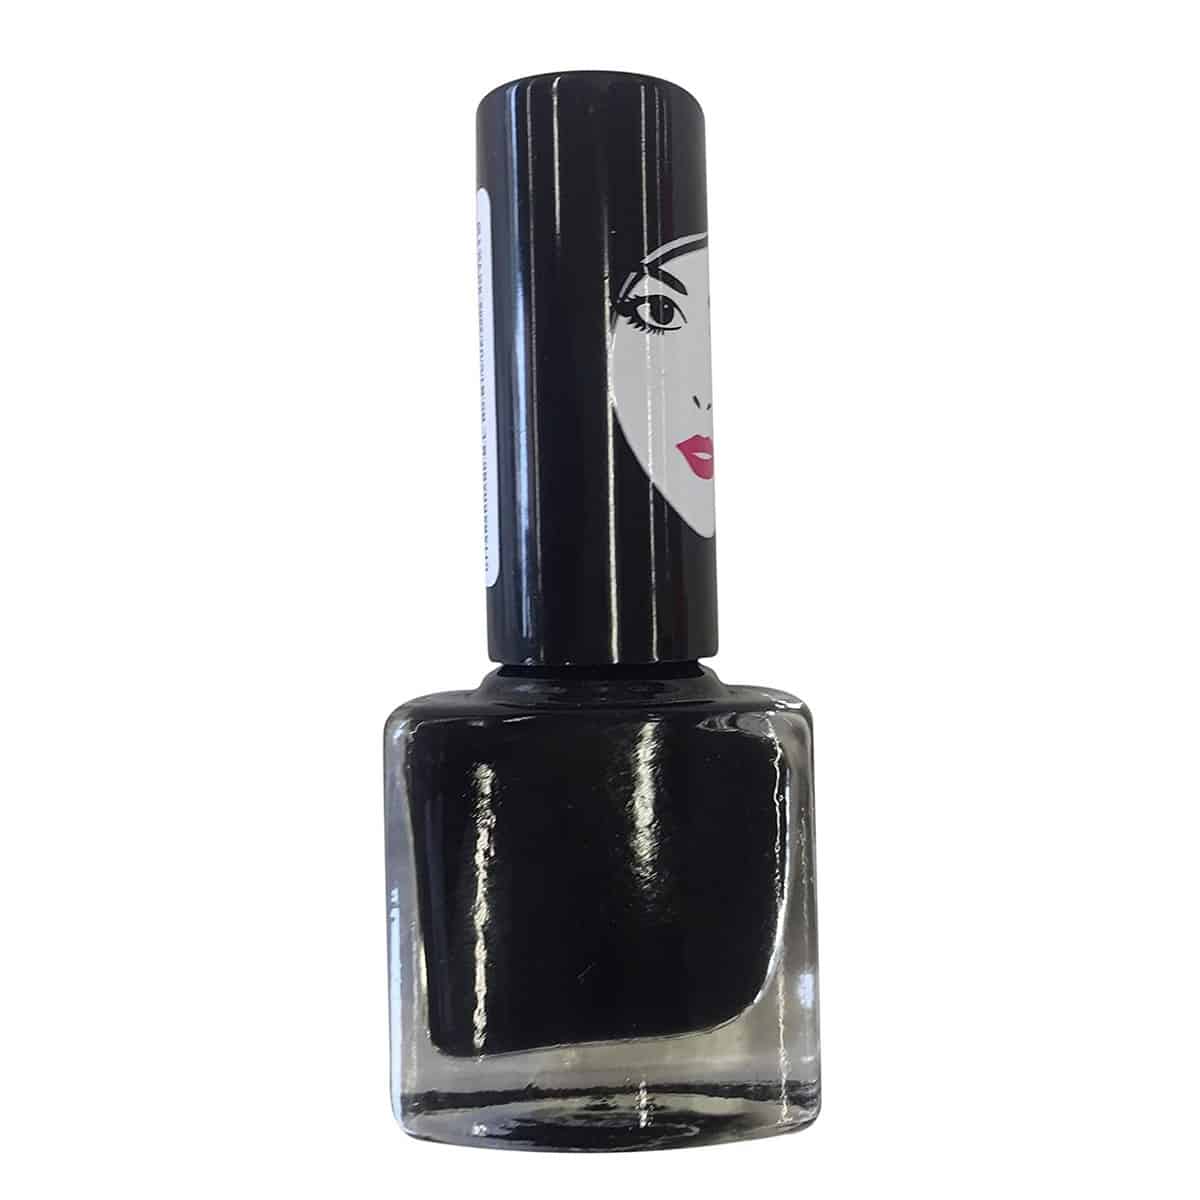 ELLE 18 Nail Pops Nail Color 156 156 - Price in India, Buy ELLE 18 Nail  Pops Nail Color 156 156 Online In India, Reviews, Ratings & Features |  Flipkart.com